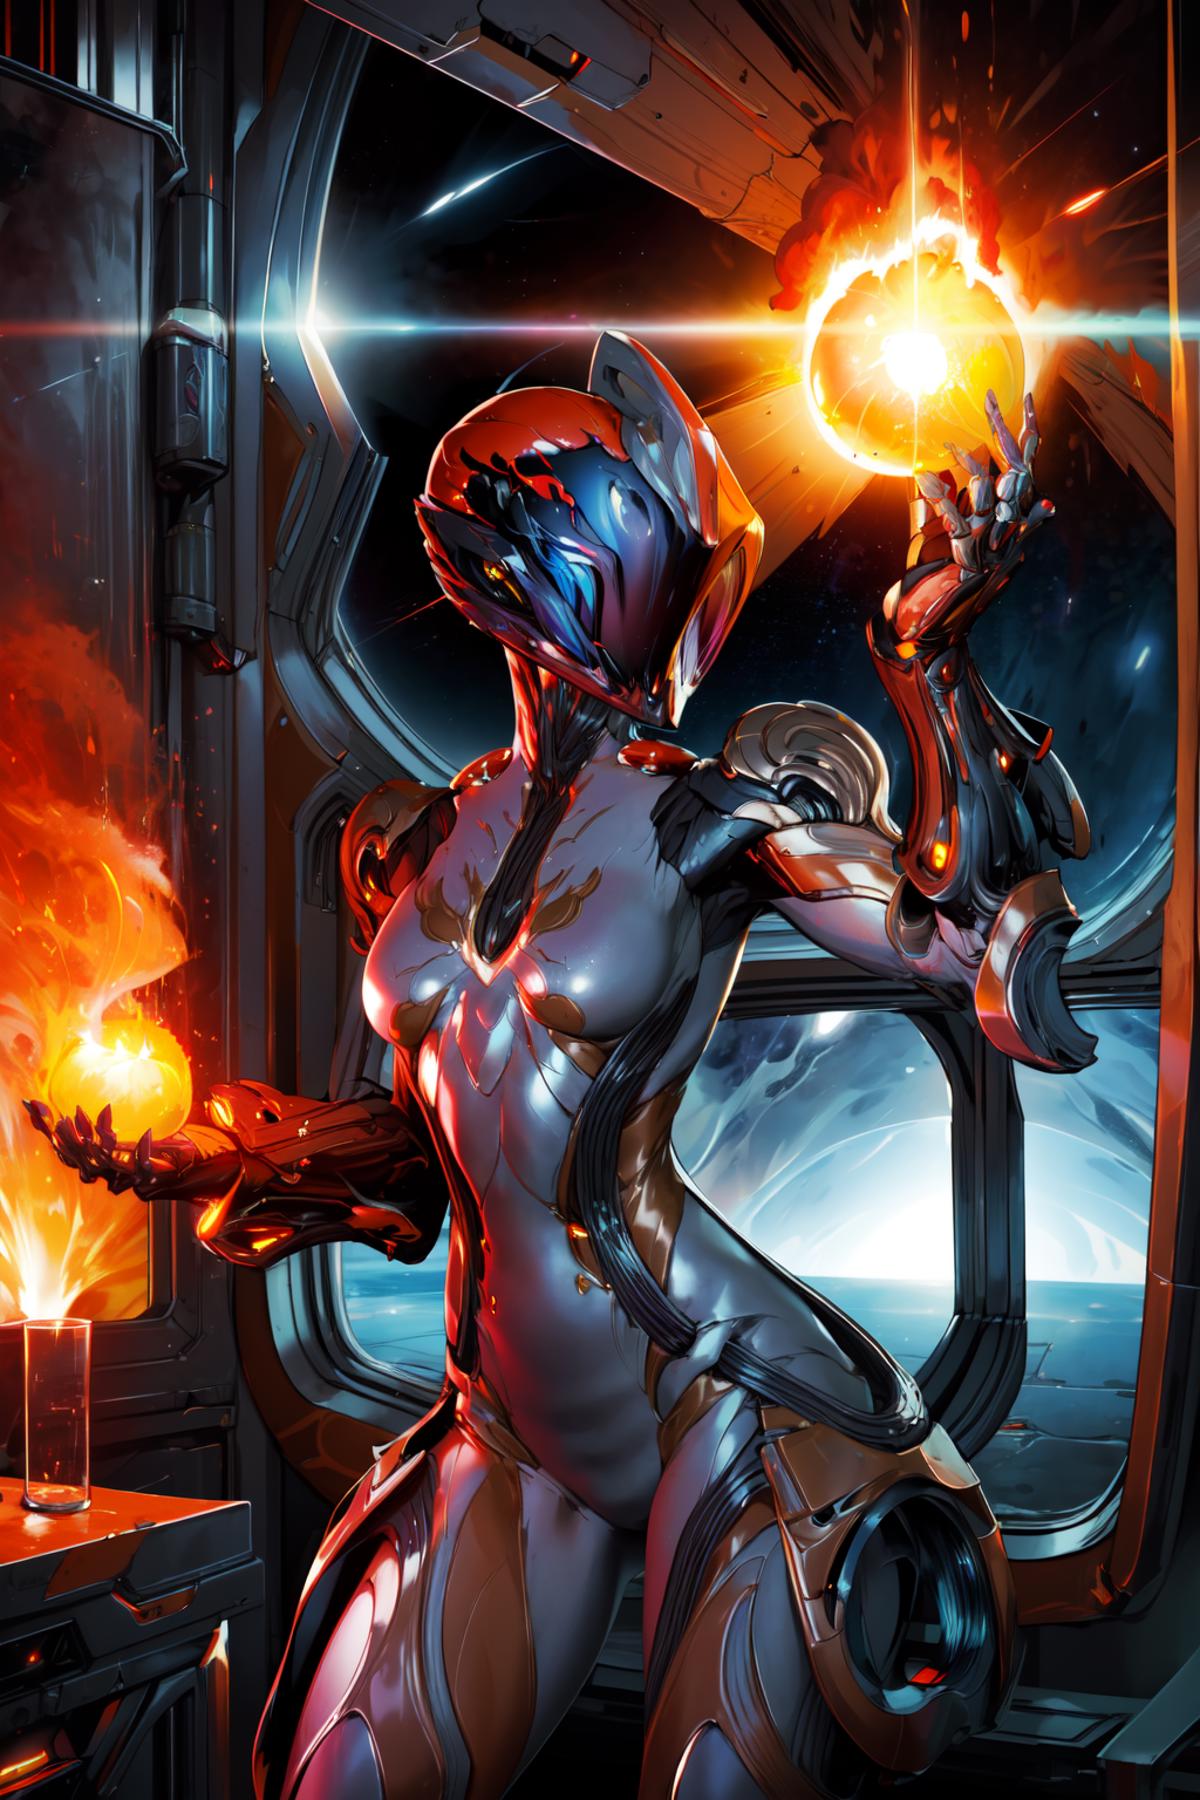 Ember - Warframe (nsfw) image by UnknownNo3